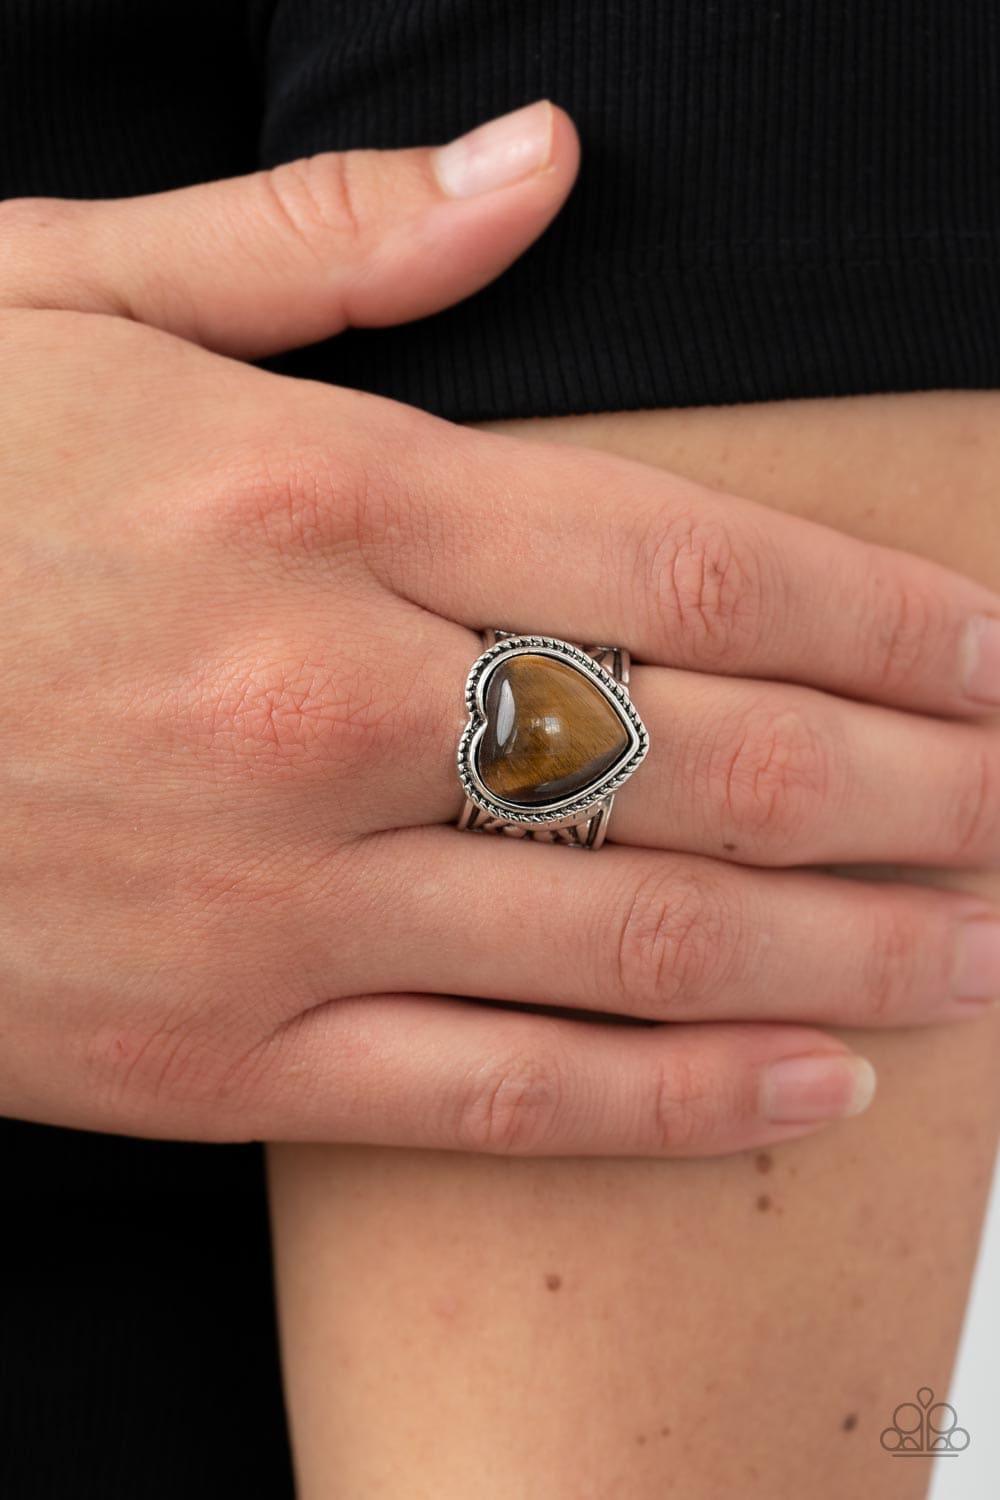 Paparazzi Accessories - Stone Age Admirer - Brown Ring - Bling by JessieK